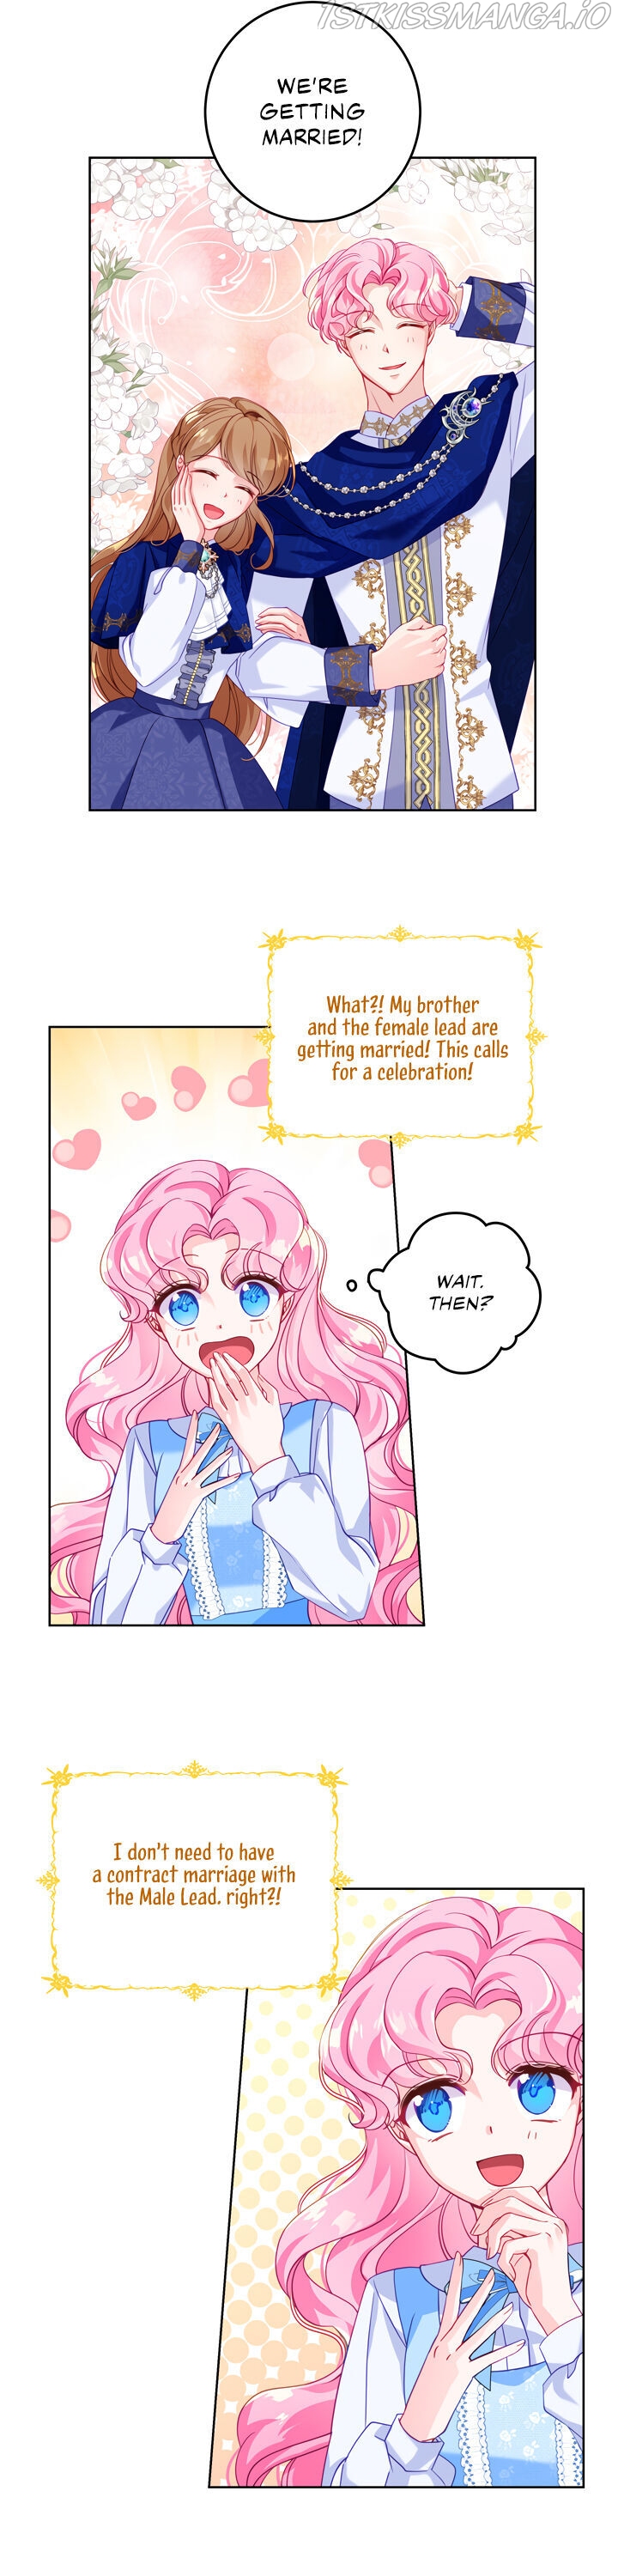 I Will Seduce the Male Lead for My Older Brother Chapter 0 - Page 6